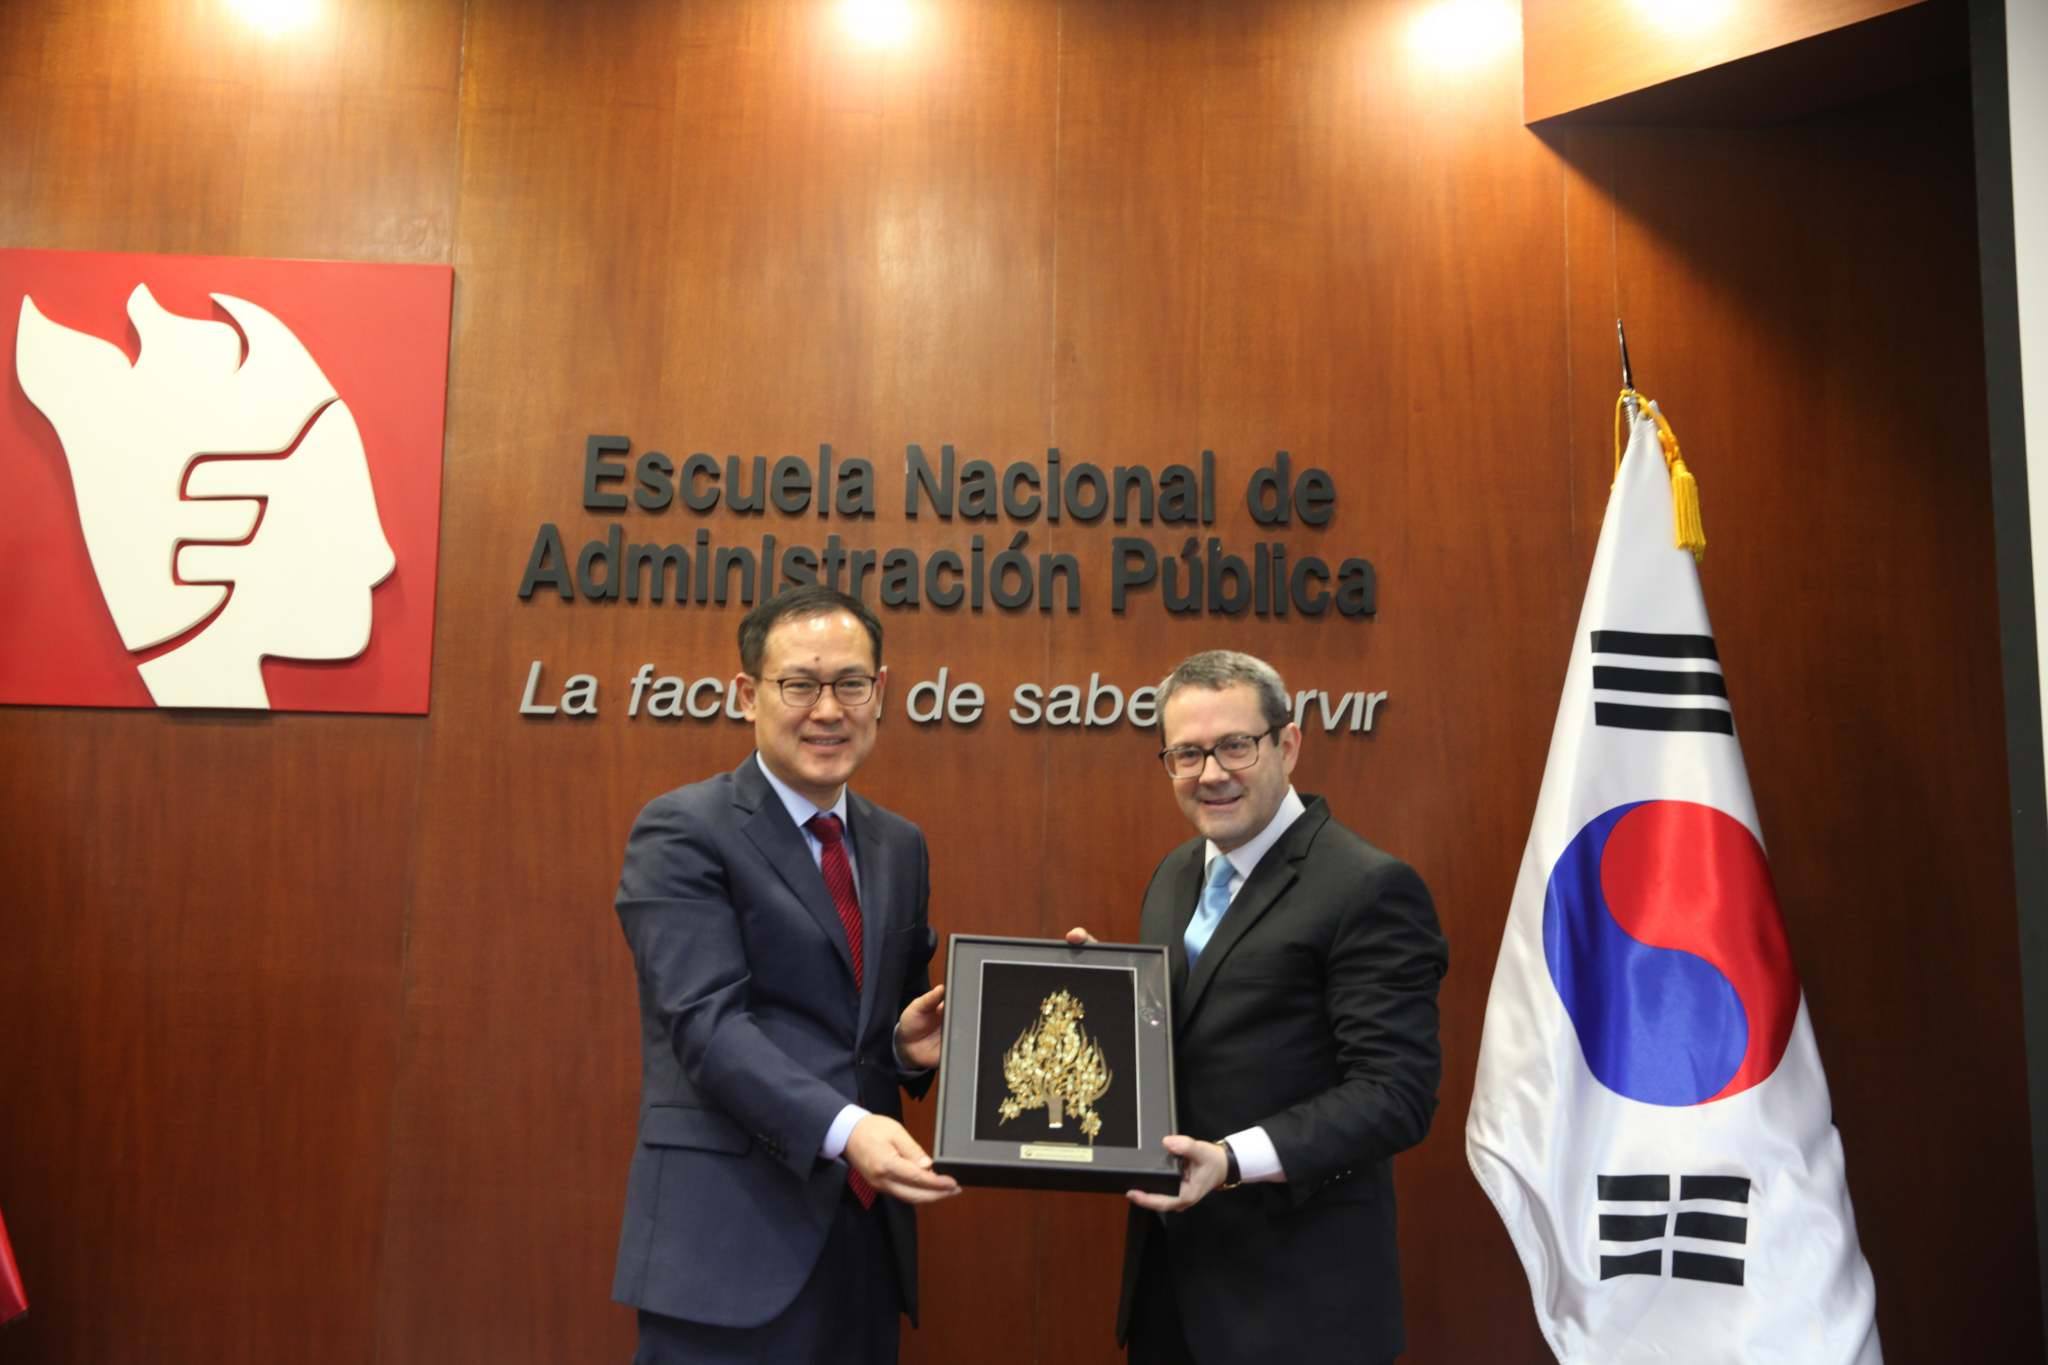 MOU concluded with SERVIR during on-site training in Peru 큰 이미지[마우스 클릭 시 창닫기]